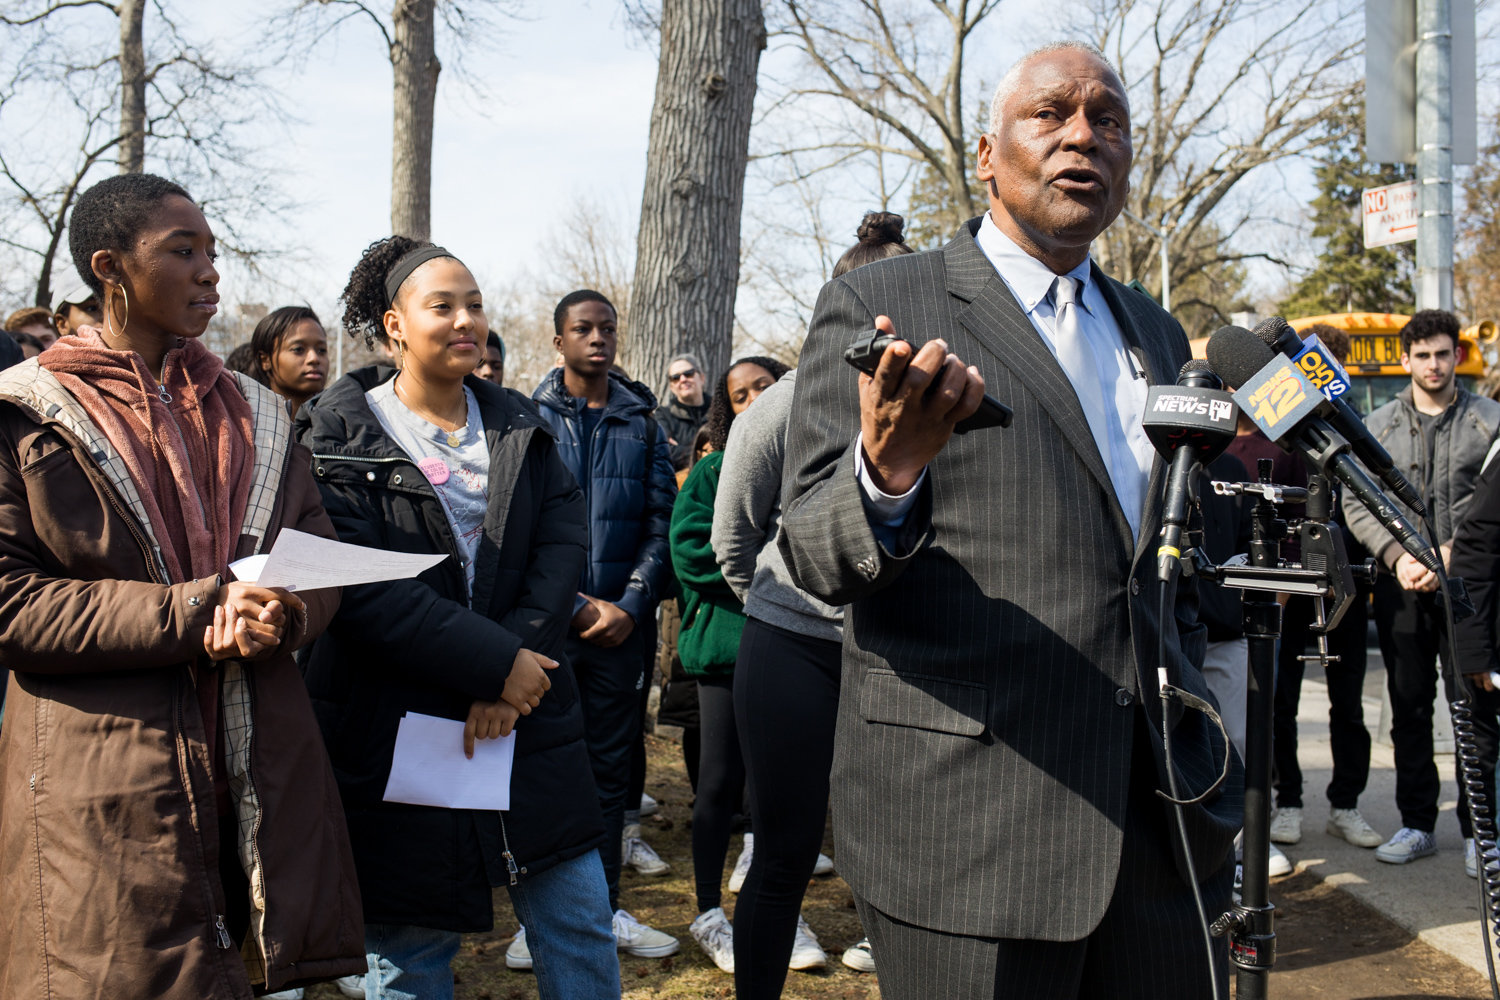 Keith Wright, an Ethical Culture Fieldston School alum, speaks at a news conference last year about the administration’s commitment to tackle robust reforms addressing what some students described as deep-seated racial issues. The school is embroiled in controversy once again after it fired a history teacher accused of making controversial remarks on social media.